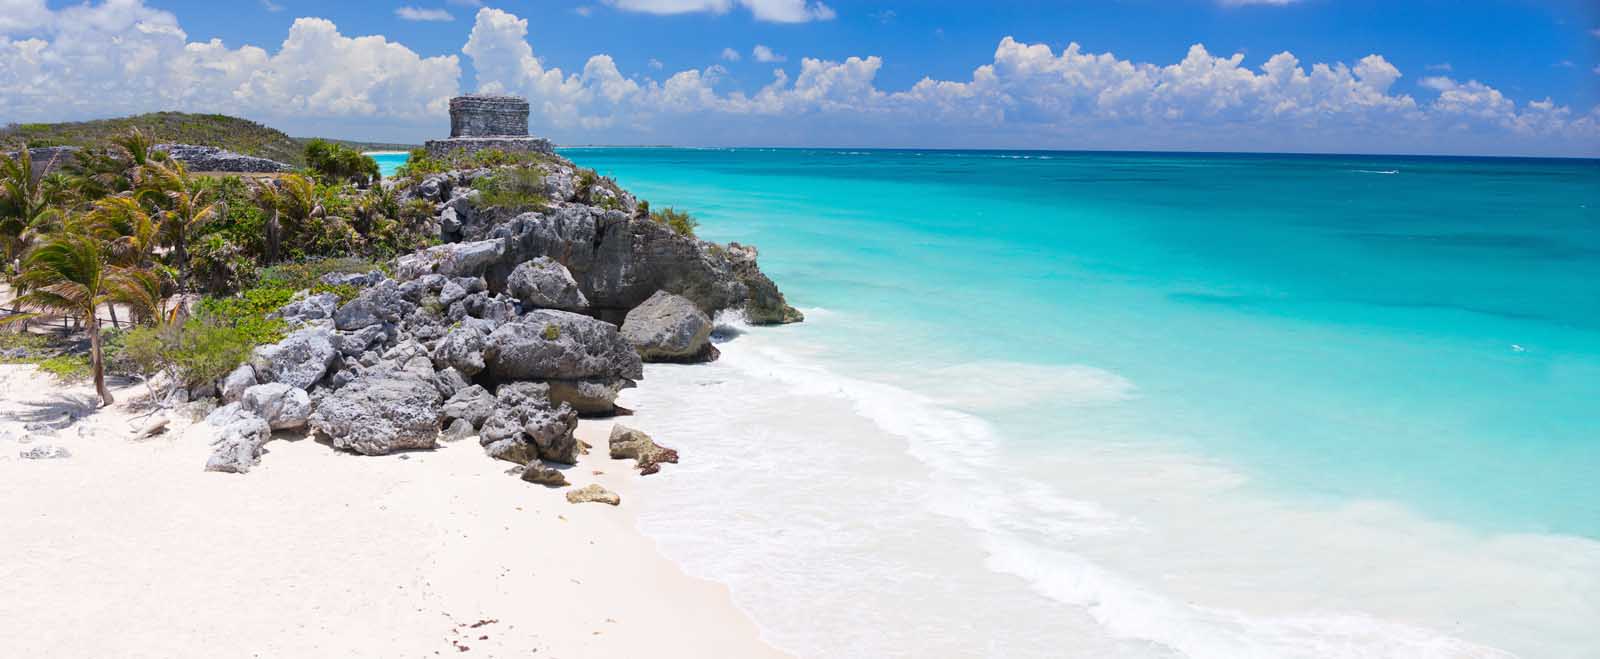 Best Places to Visit in Mexico Tulum Ruins